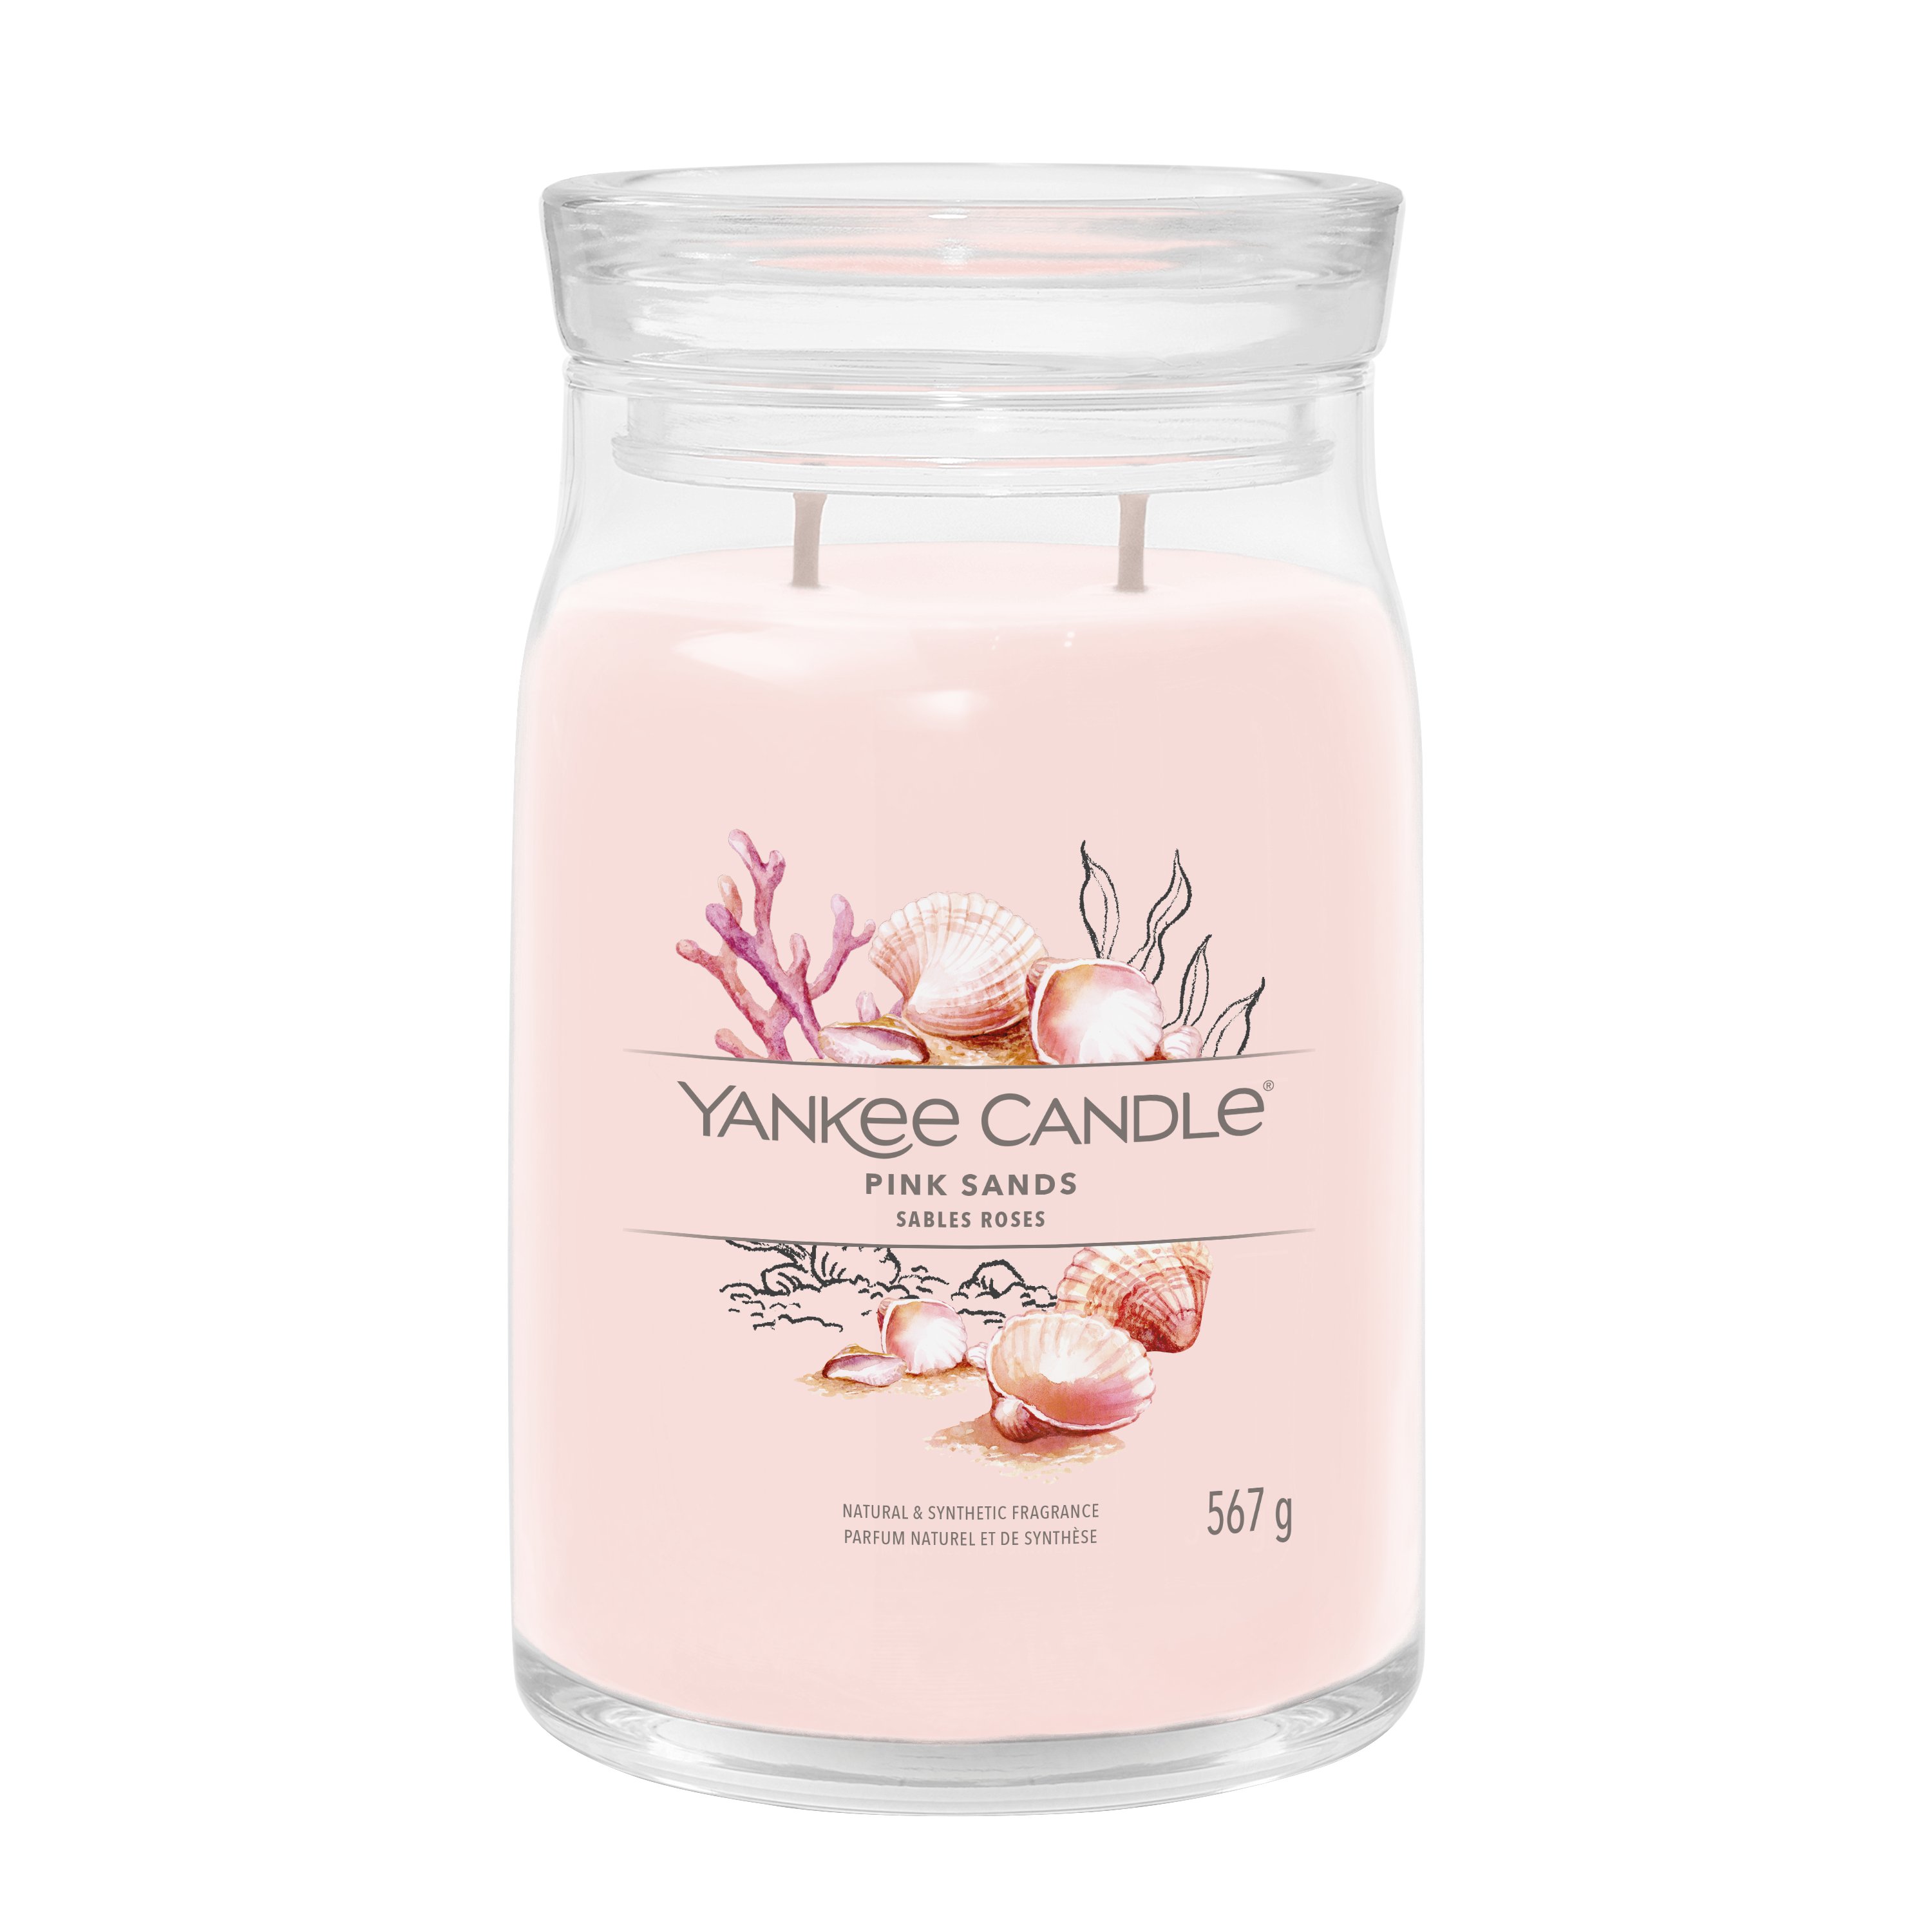 Yankee Candle by Pink Sands Scented Large Jar 22 oz